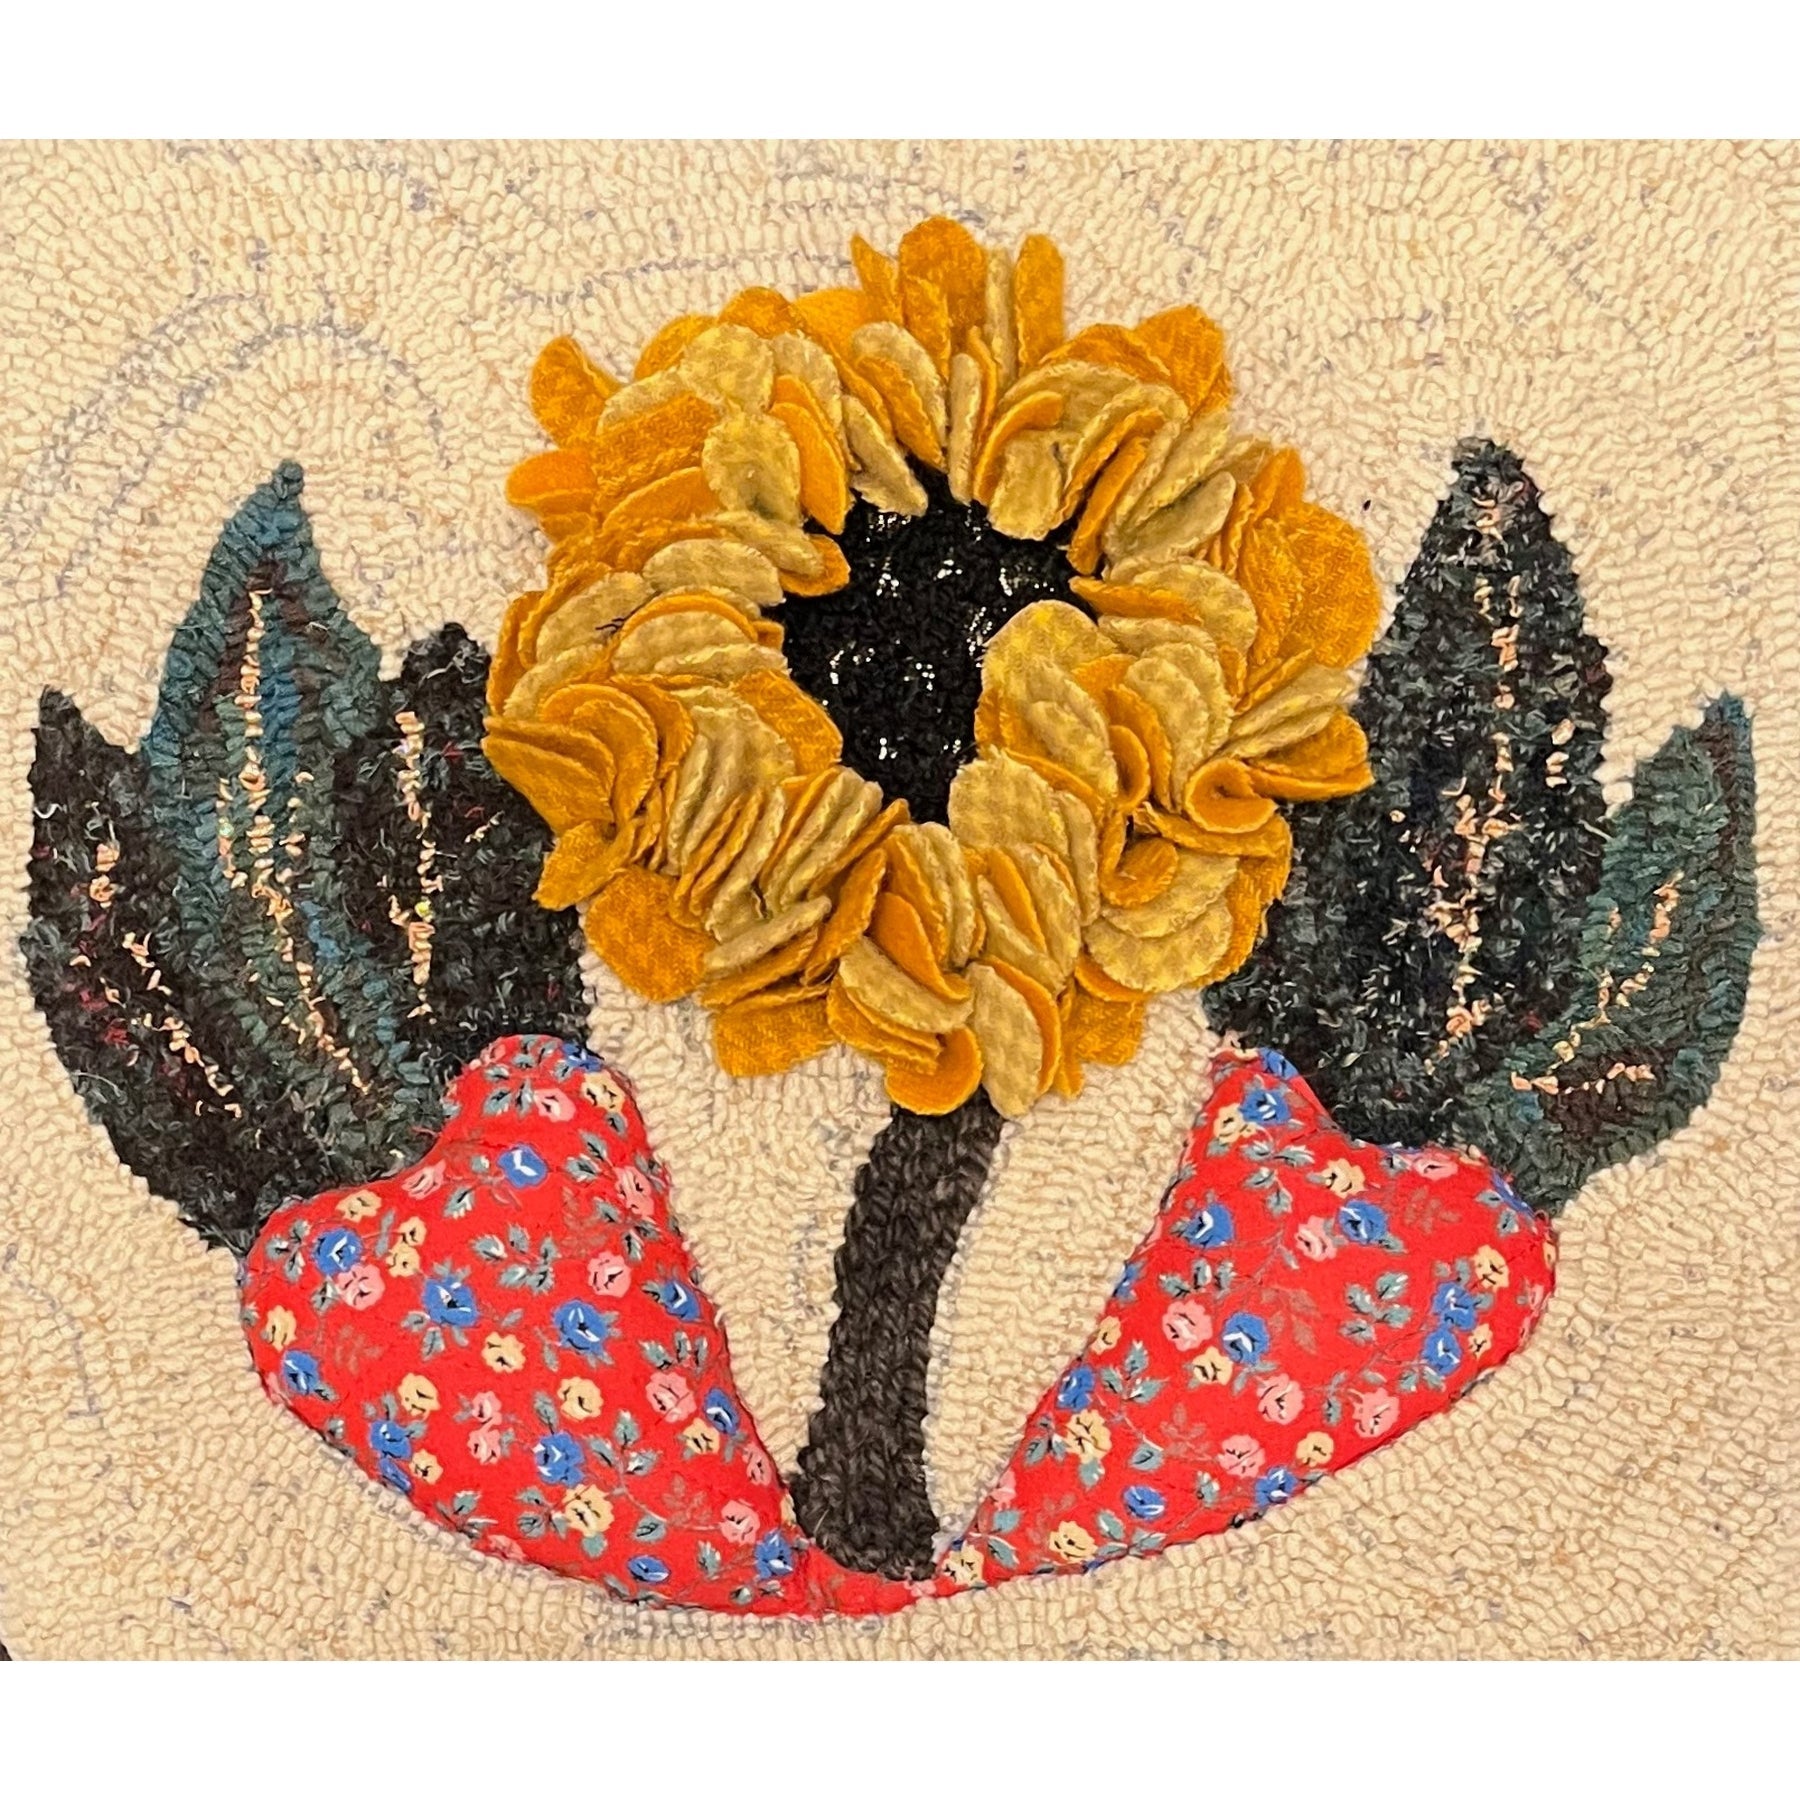 Sunflower Hearts, rug hooked by Rita Wagner